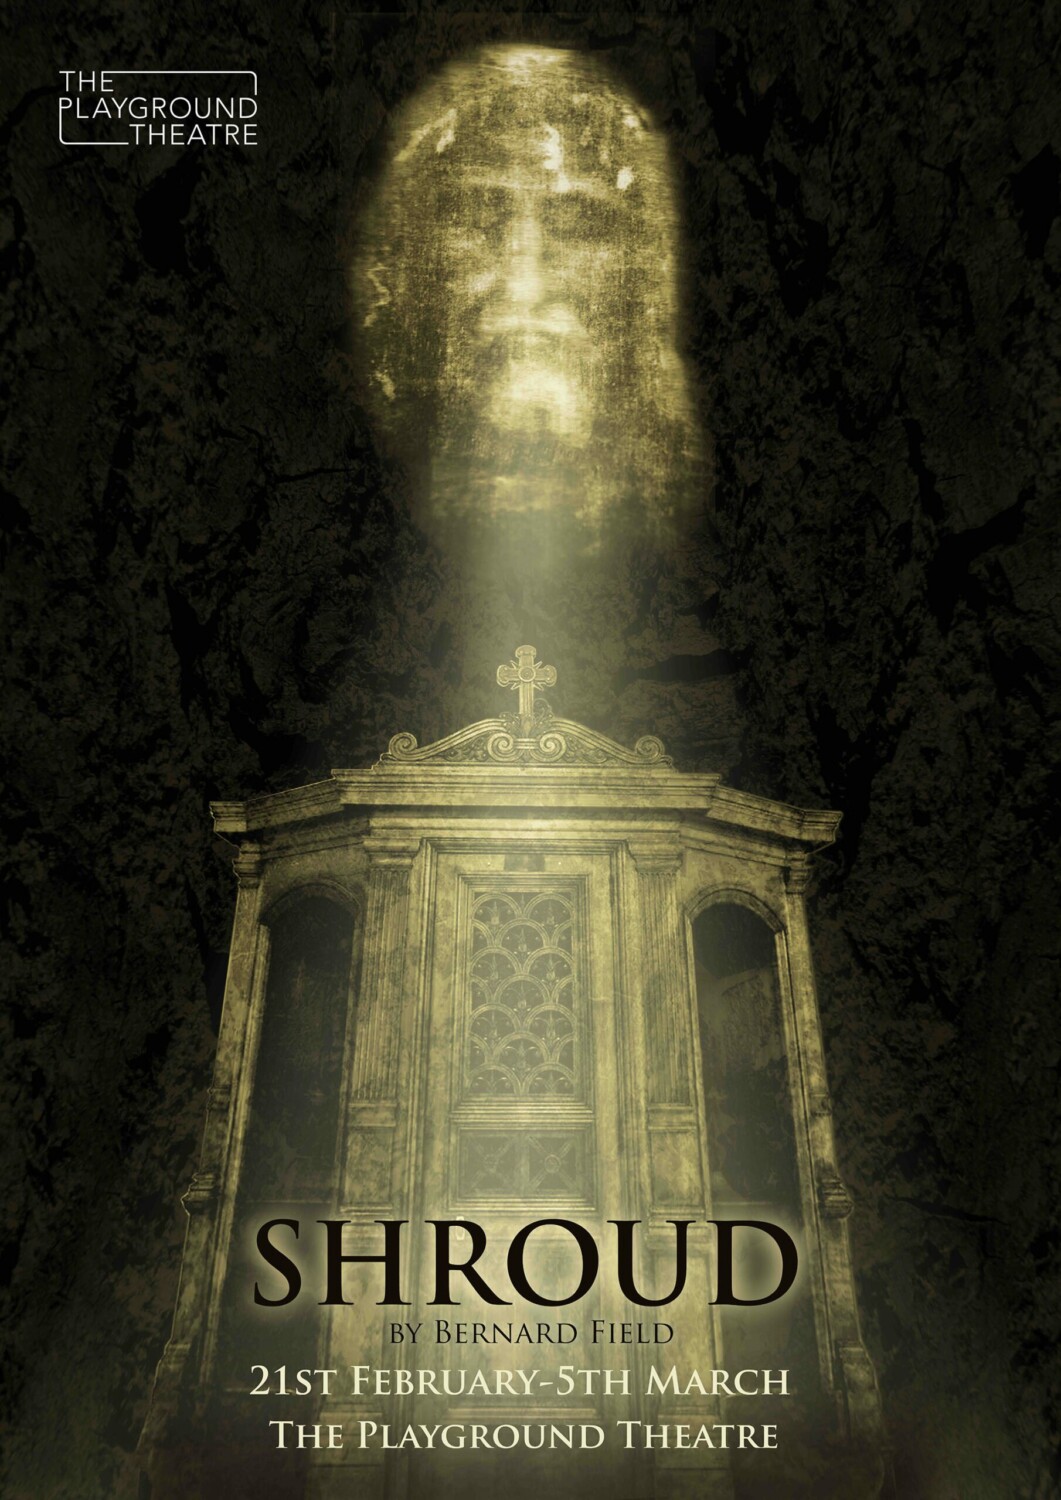 Shroud. Written by Bernard Field and Directed by Jim Ivers